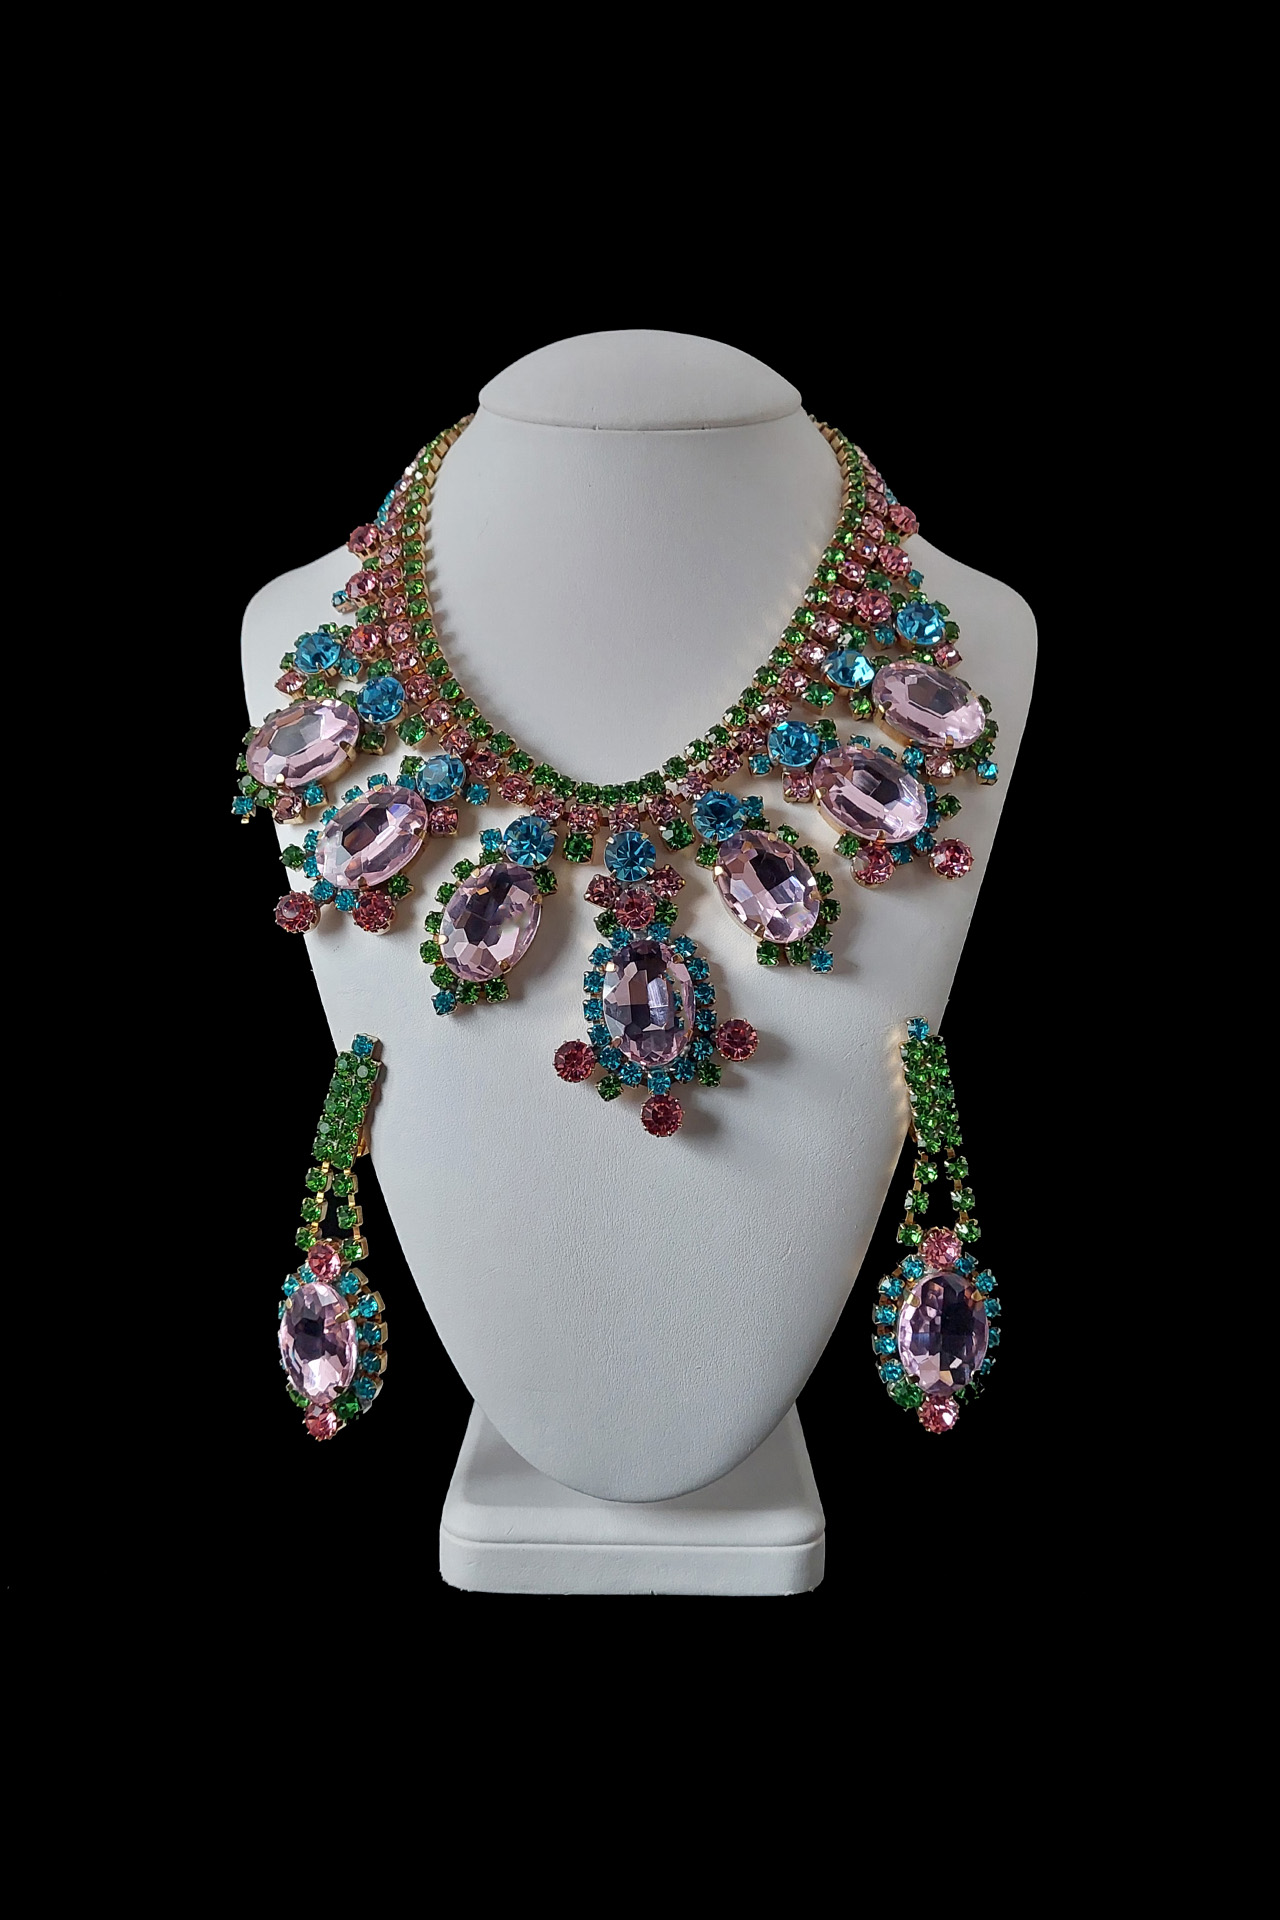 Handmade earrings and necklace from multicolor rhinestones